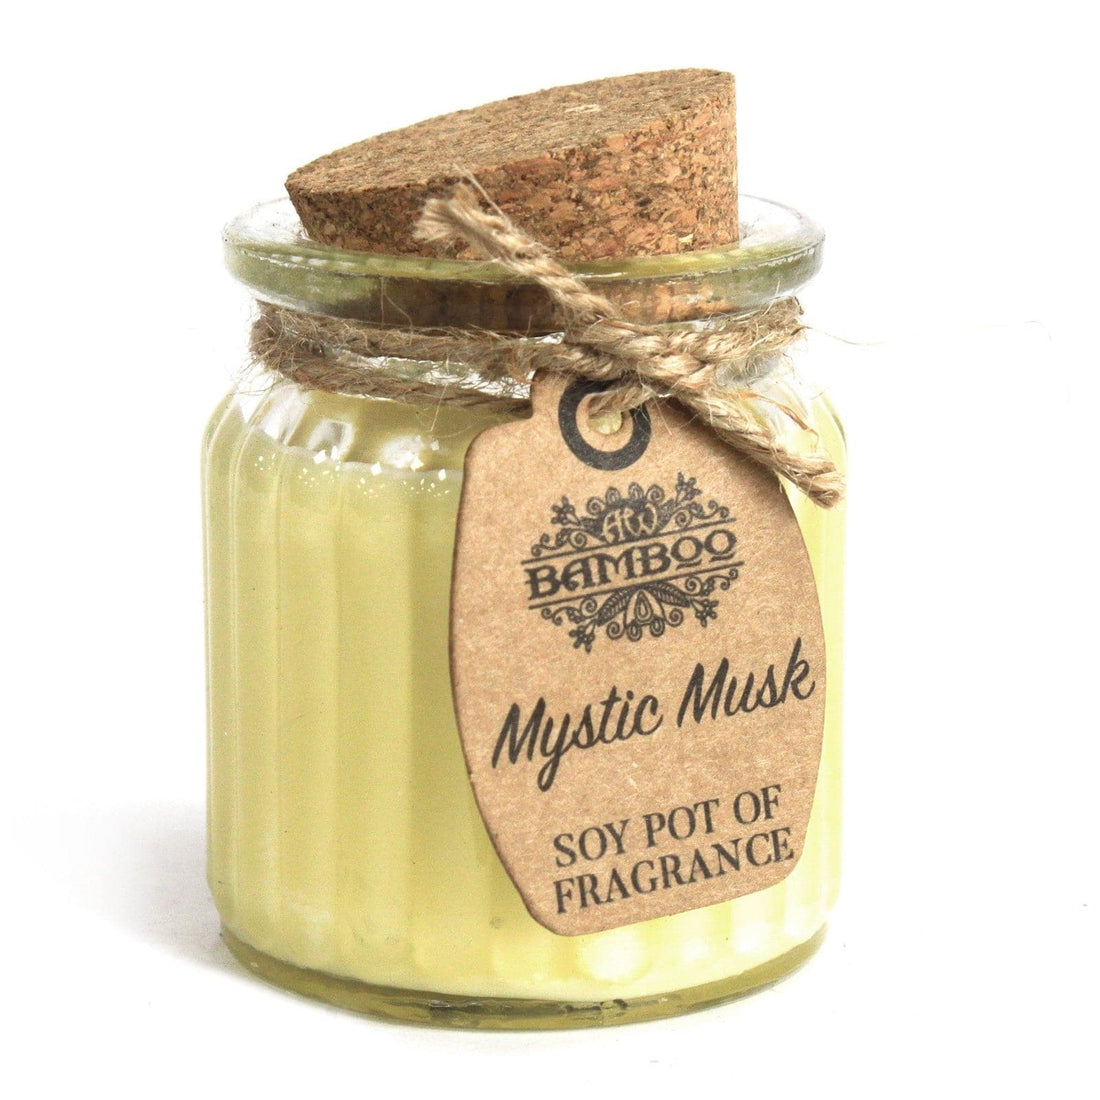 Mystic Musk Soy Pot of Fragrance Candle - best price from Maltashopper.com SOYP-07